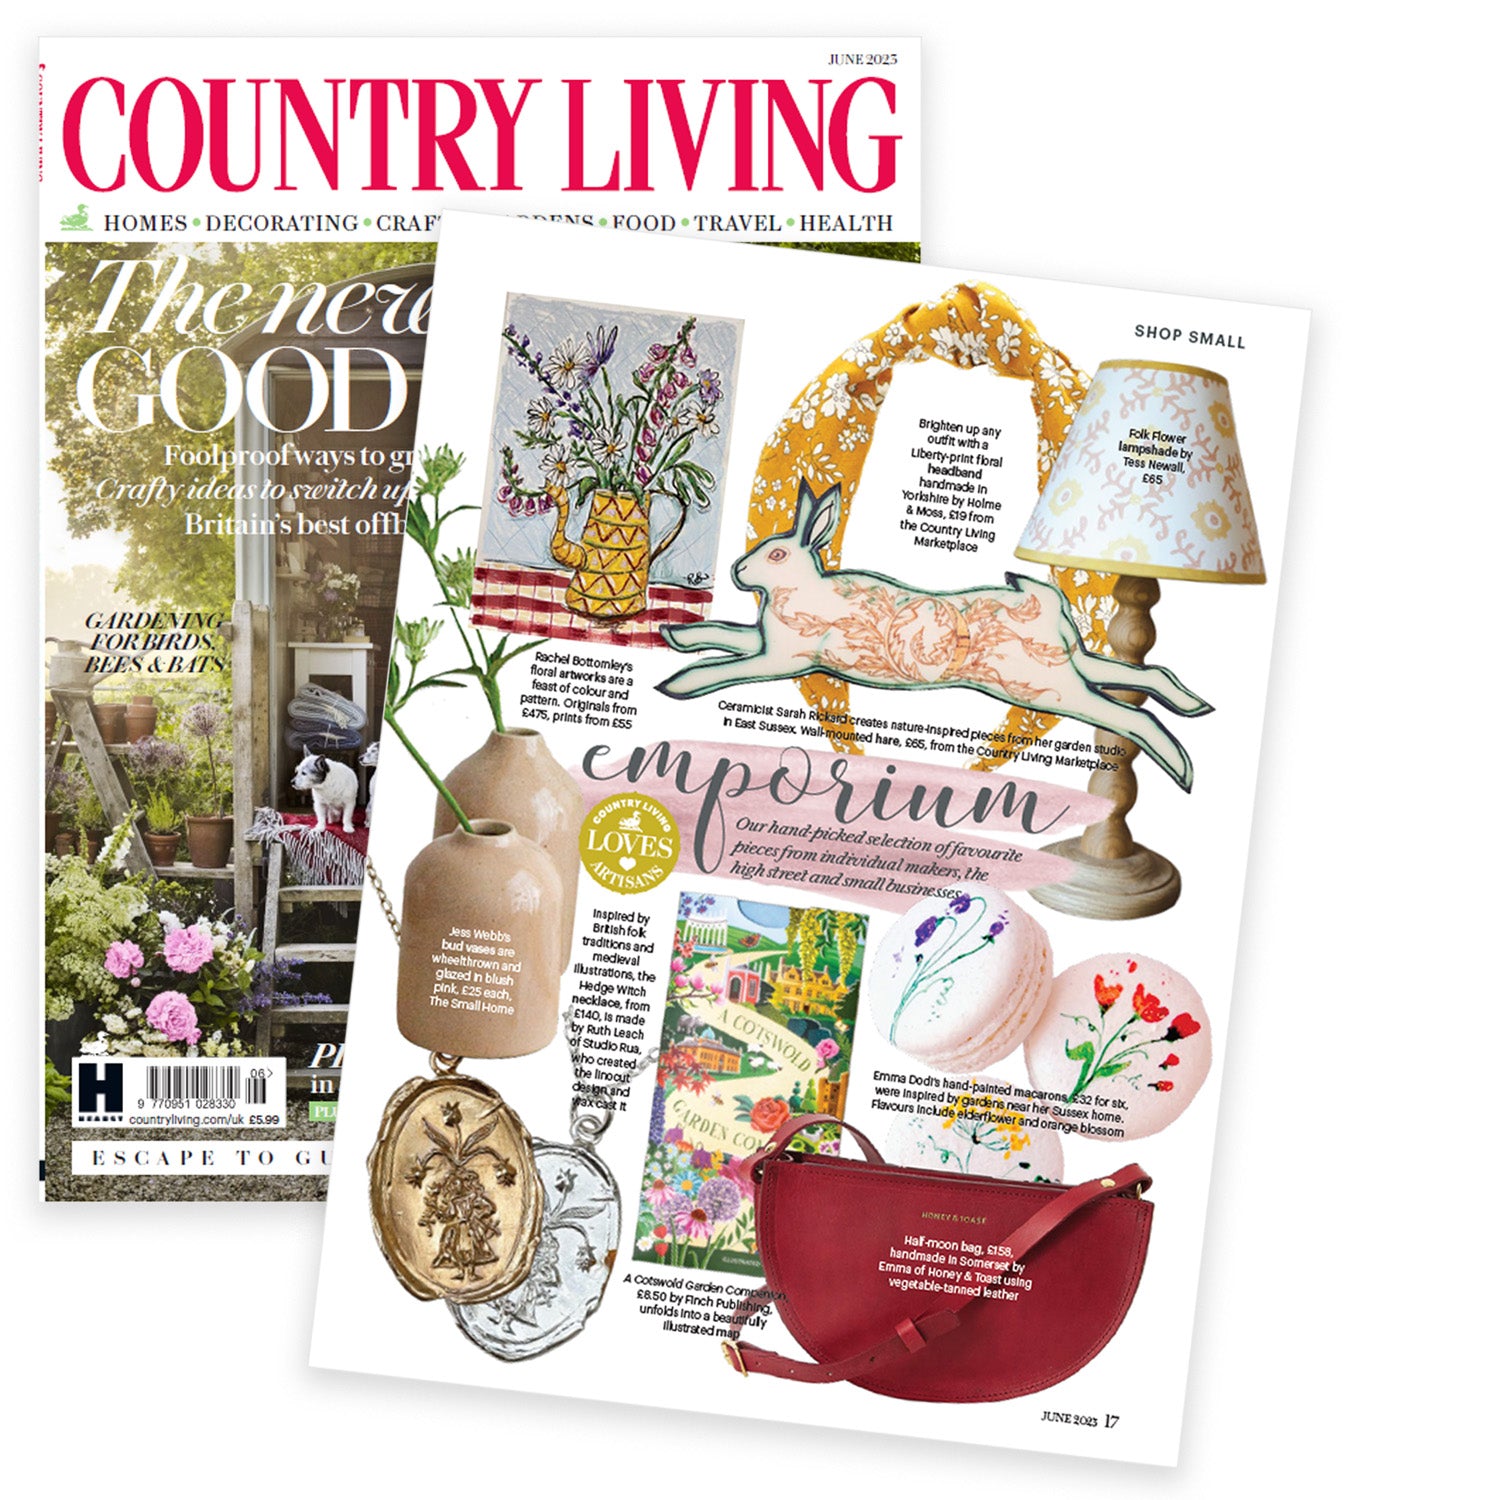 Holme & Moss Liberty London Capel G Classic Knot Headband Featured in Country Living Magazine | Holme & Moss